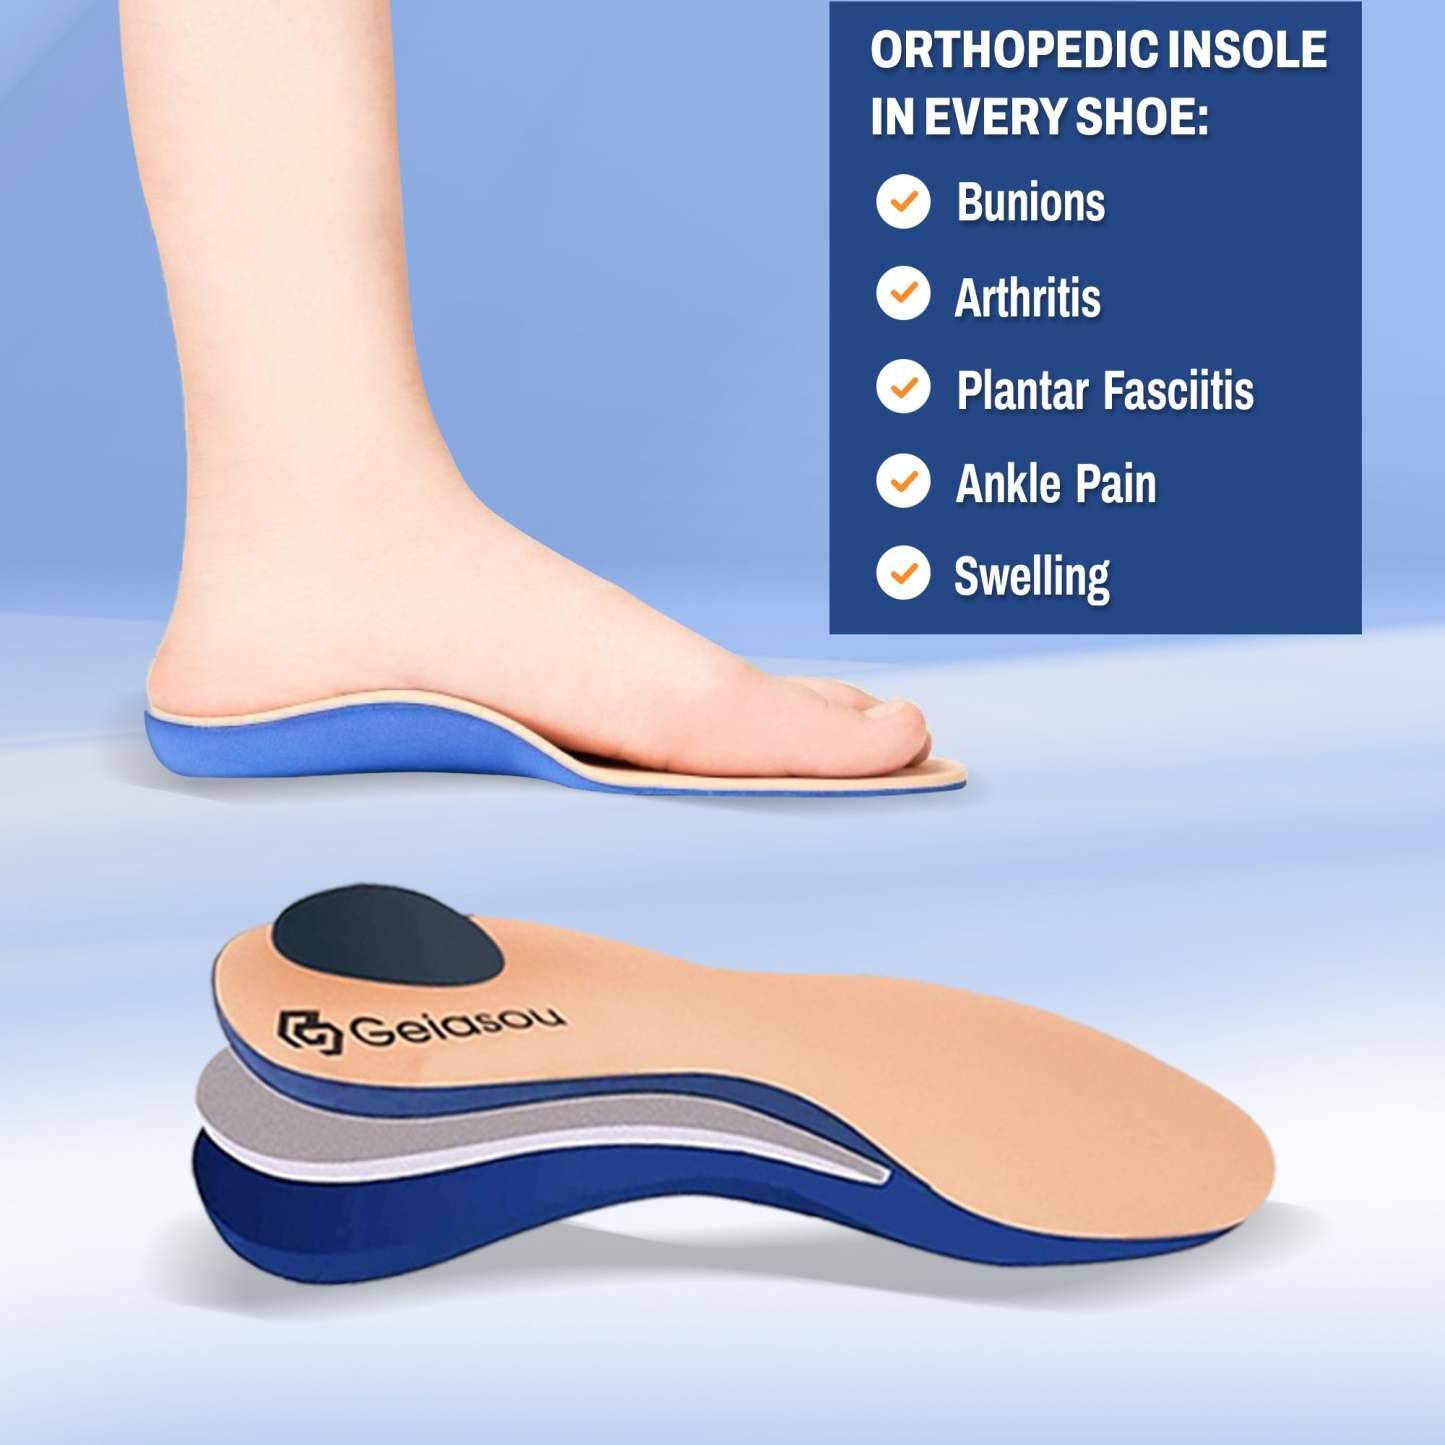 Orthopedic Men Shoes Breathable Arch Support Elastic Non-Slip Sole